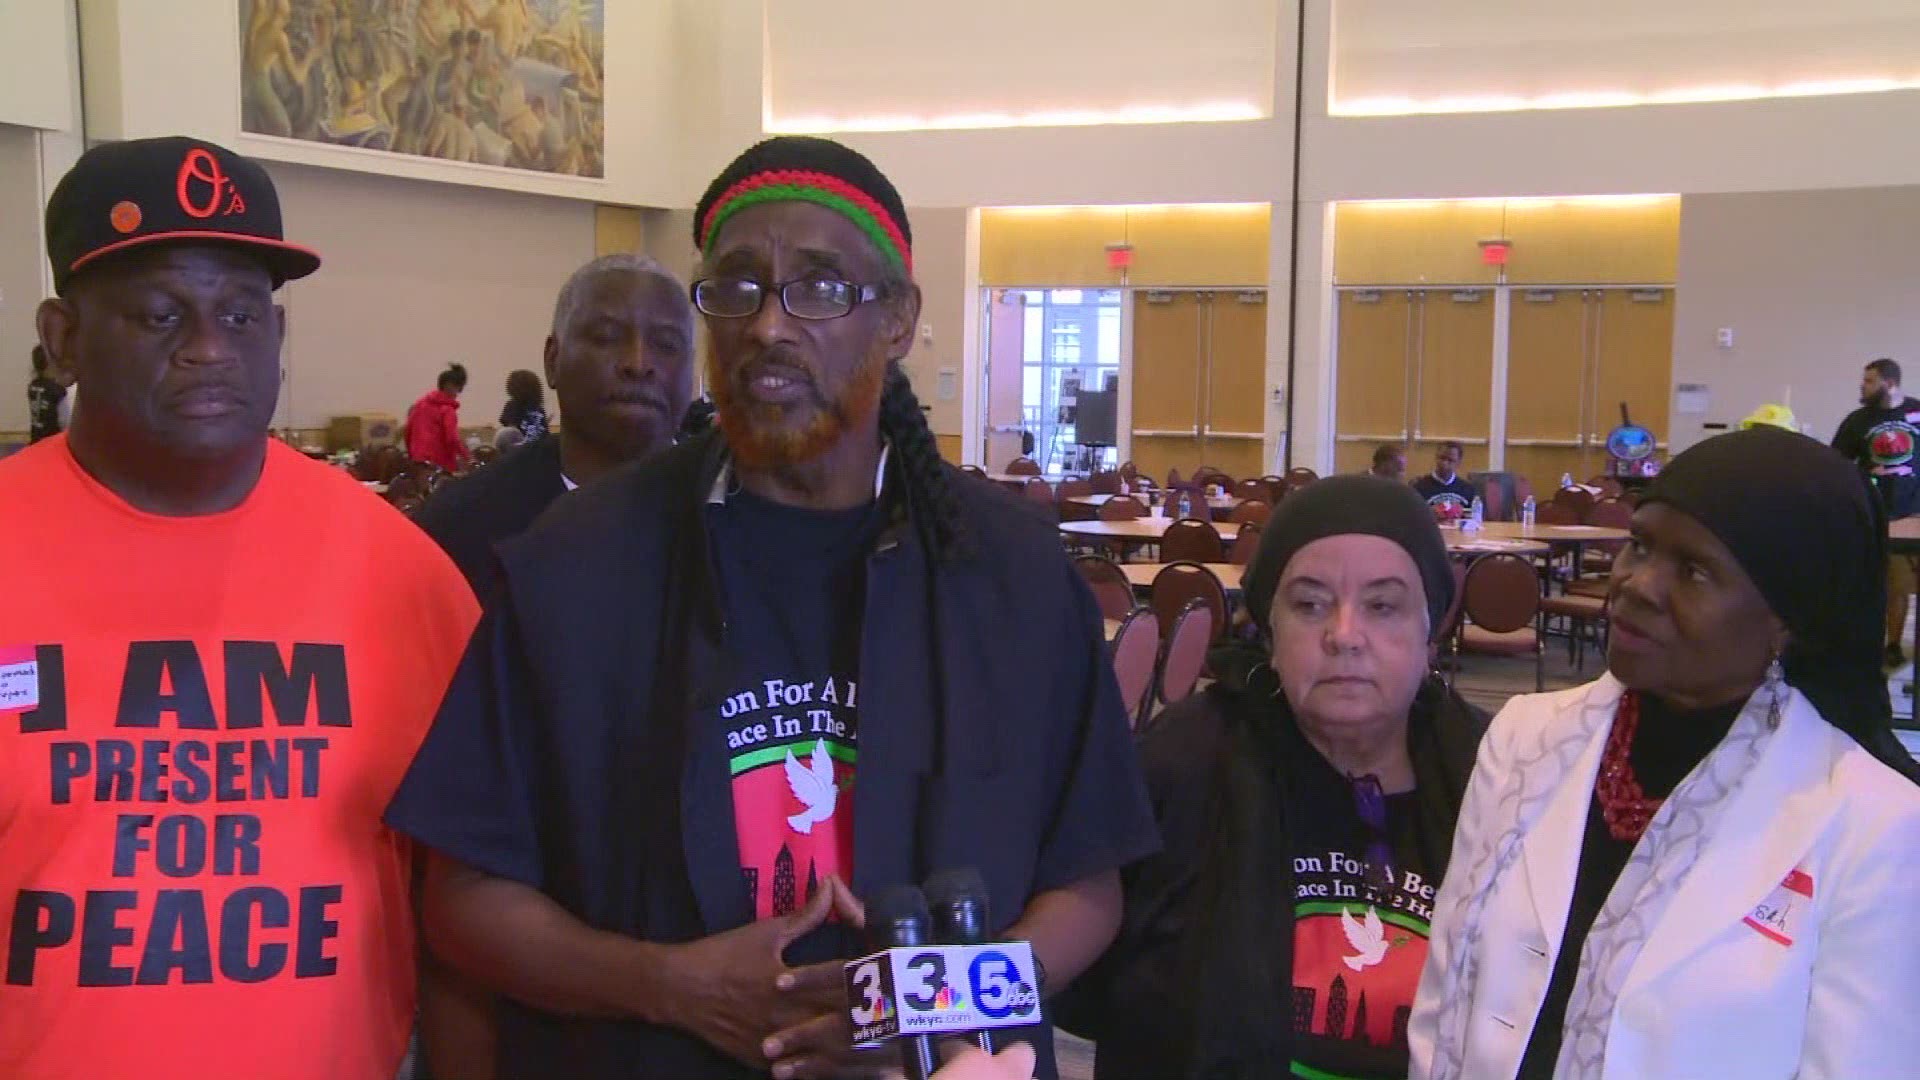 Local activists met at the National Gang Summit to address violence, crime and other issues within the country.